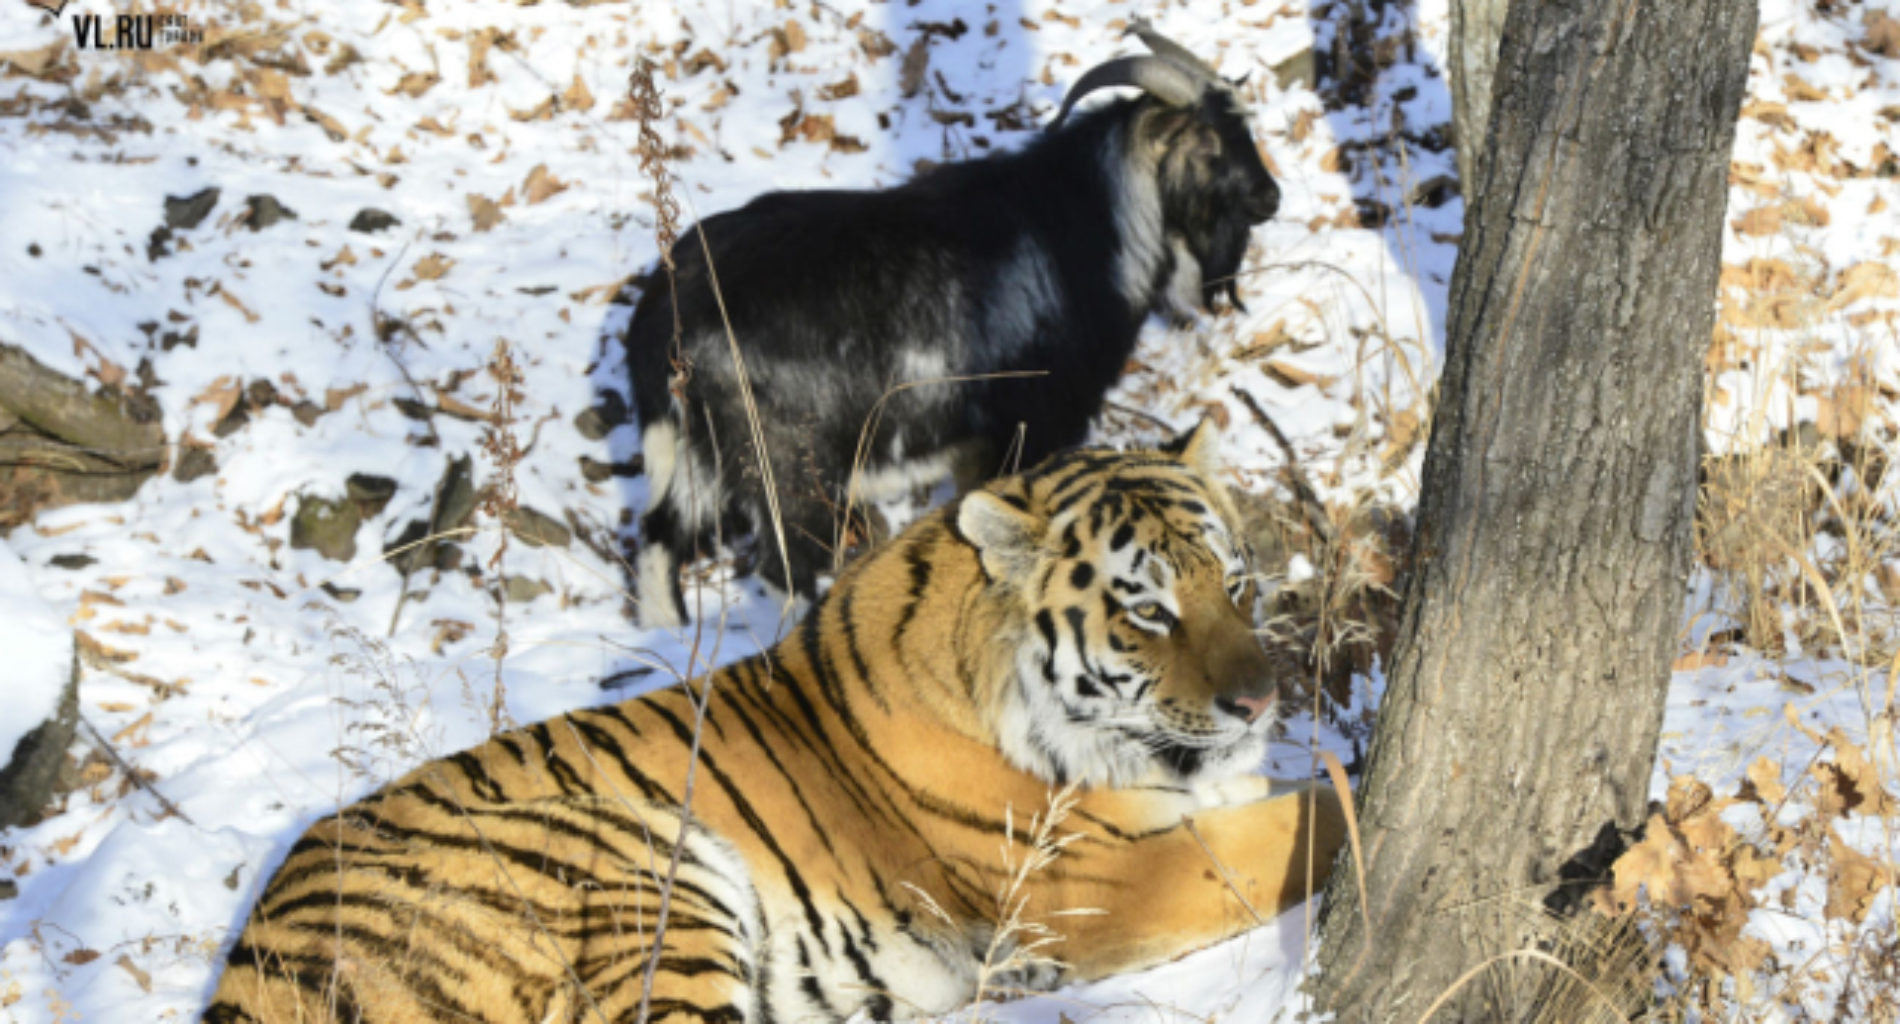 Russian politicians debate if this tiger and goat are ‘promoting homosexuality’